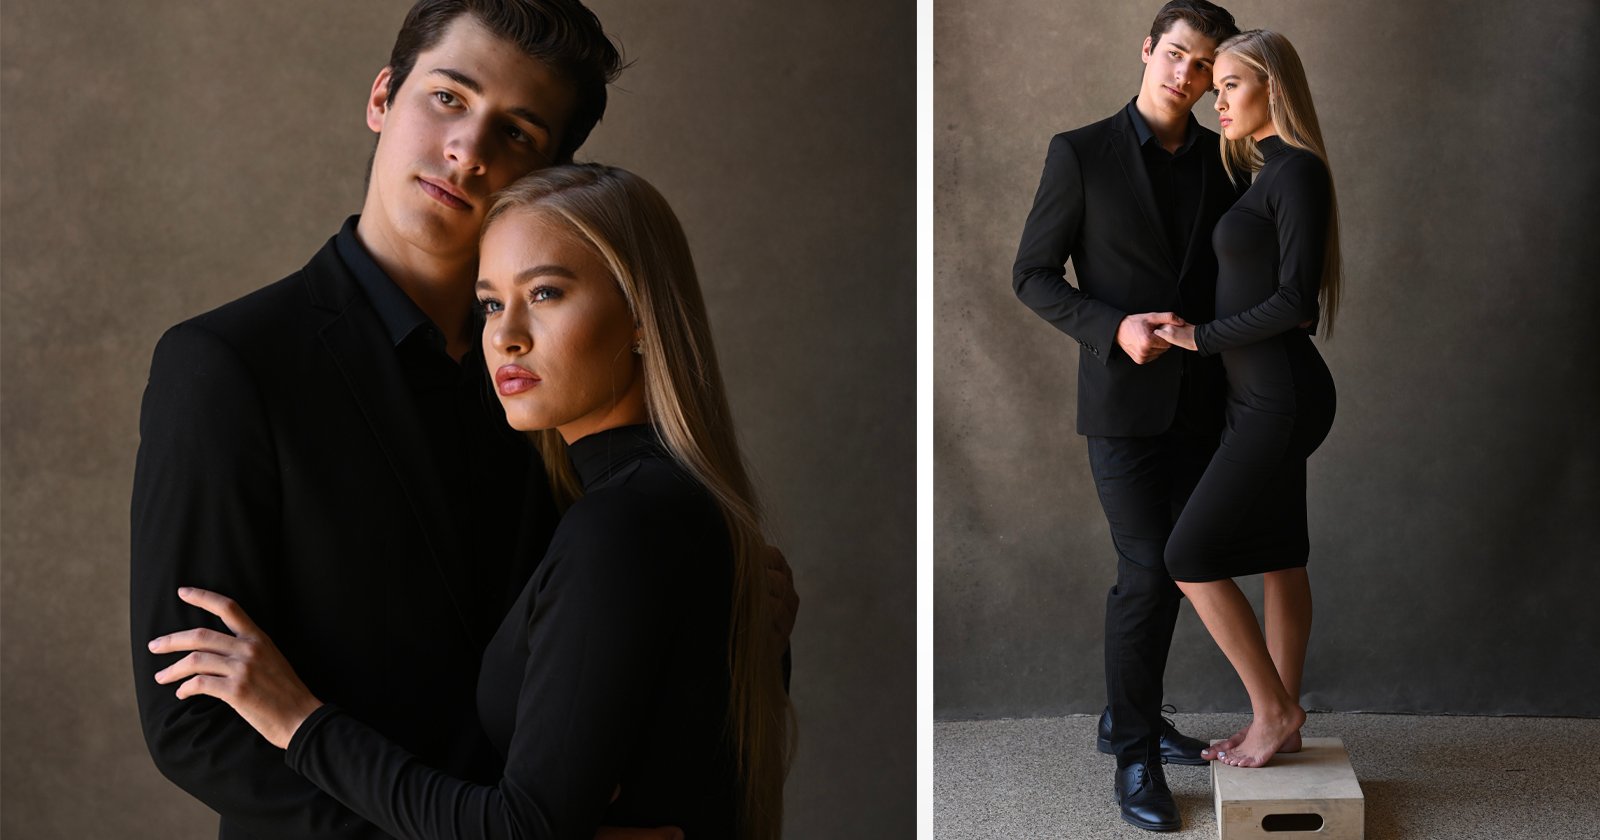 How to Photograph Couples With Height Difference